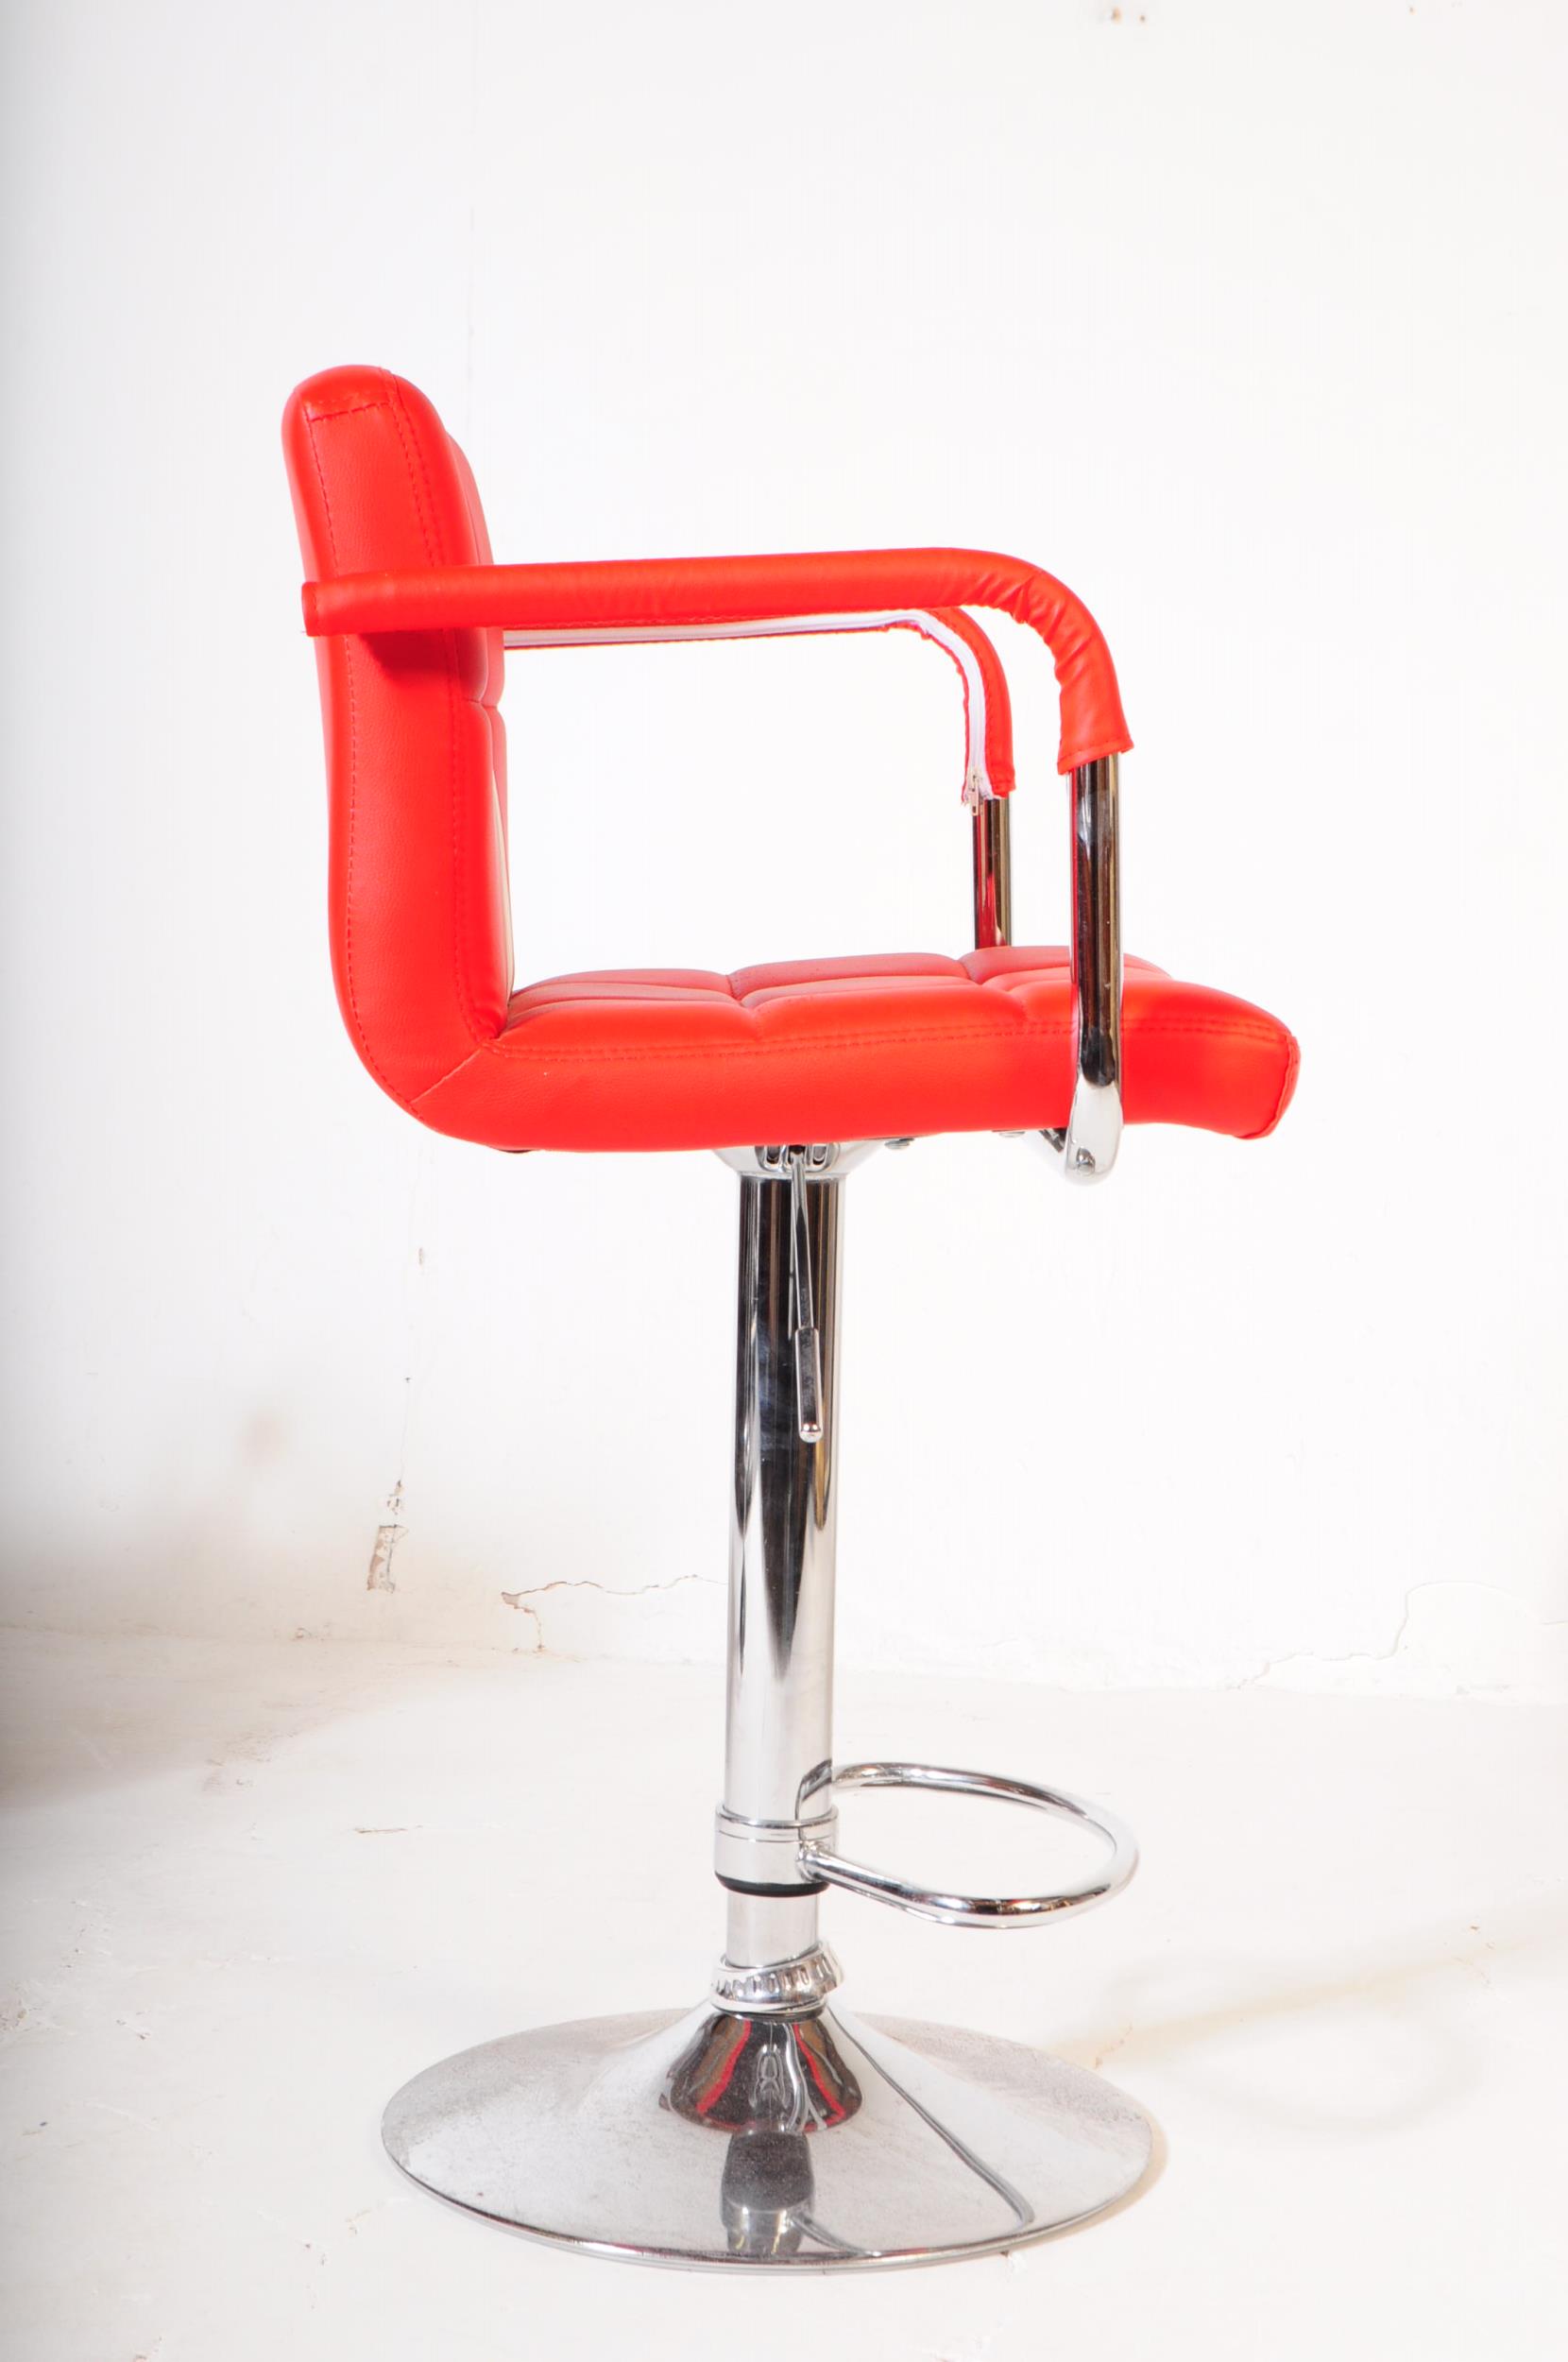 PAIR OF CONTEMPORARY VINYL RED & WHITE BAR STOOLS - Image 6 of 6